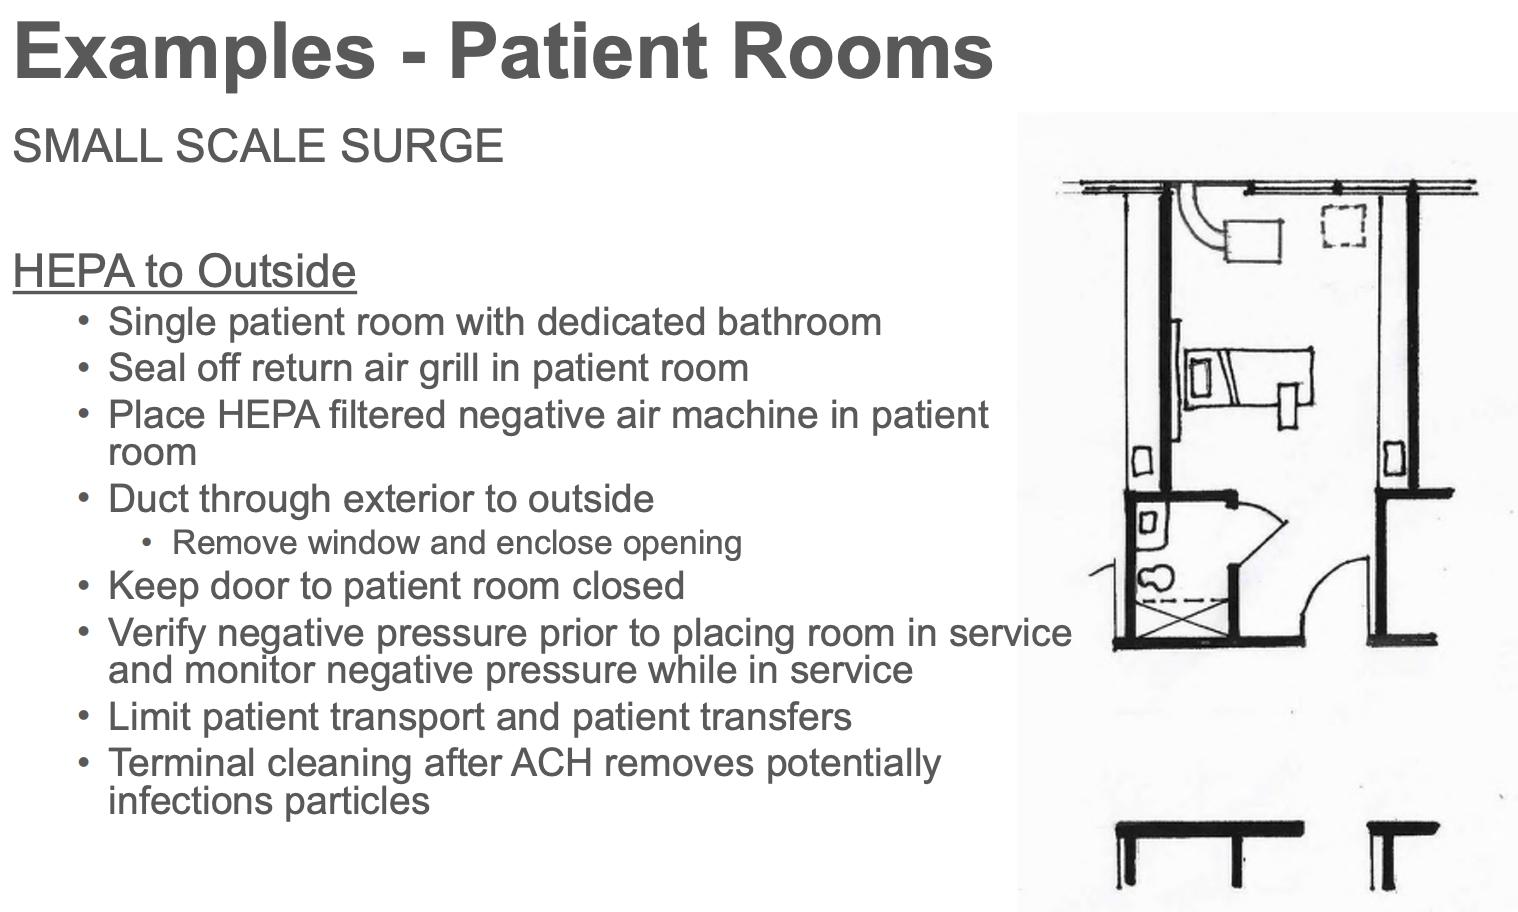 Small-surge COVID-19 patient room